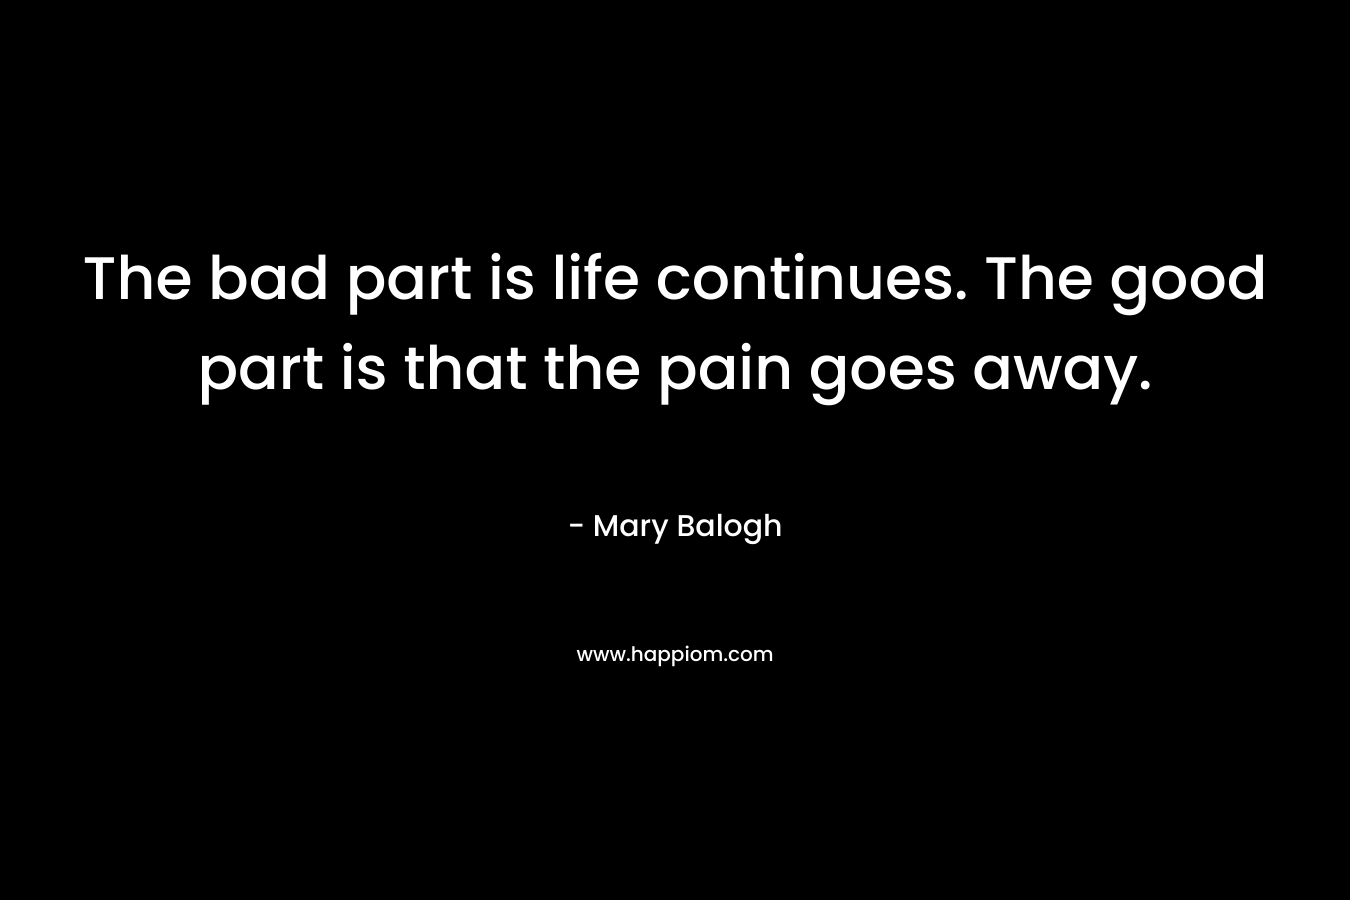 The bad part is life continues. The good part is that the pain goes away. – Mary Balogh